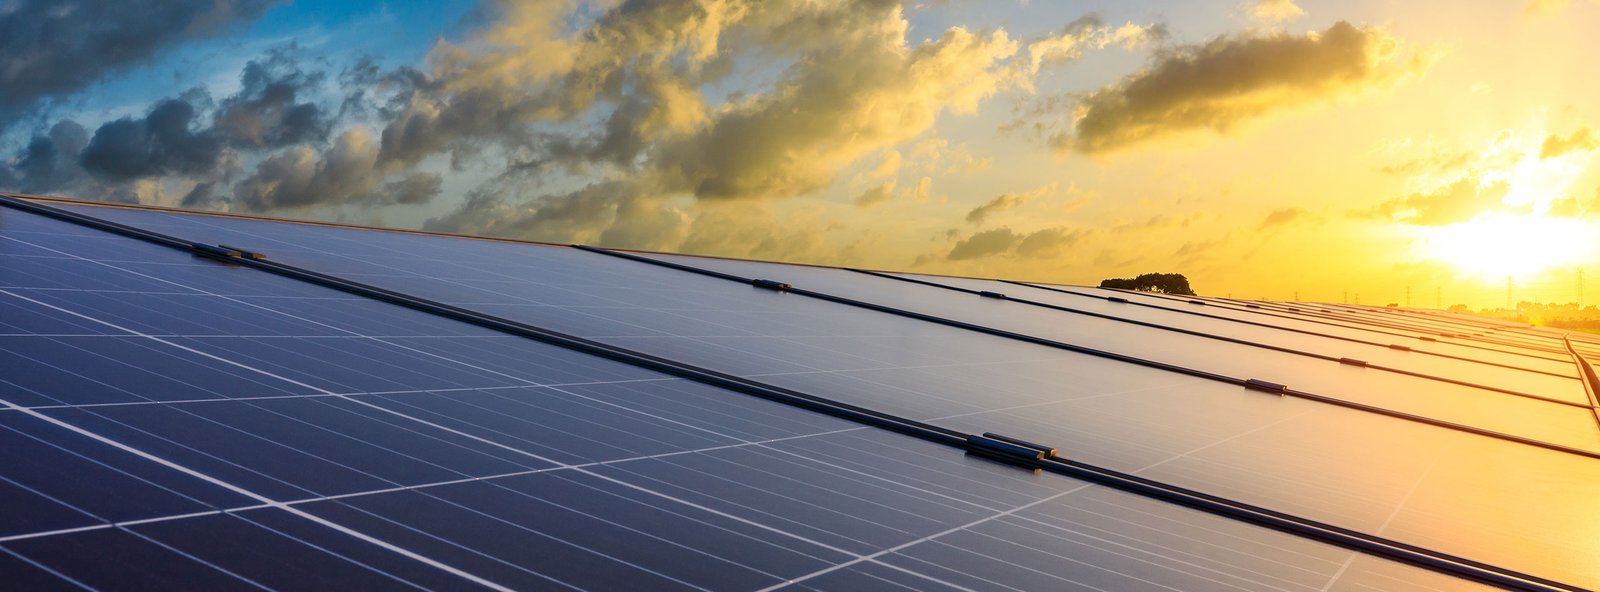 For Solar Panels: The Good, Bad and Ugly Side of Renewable Energy